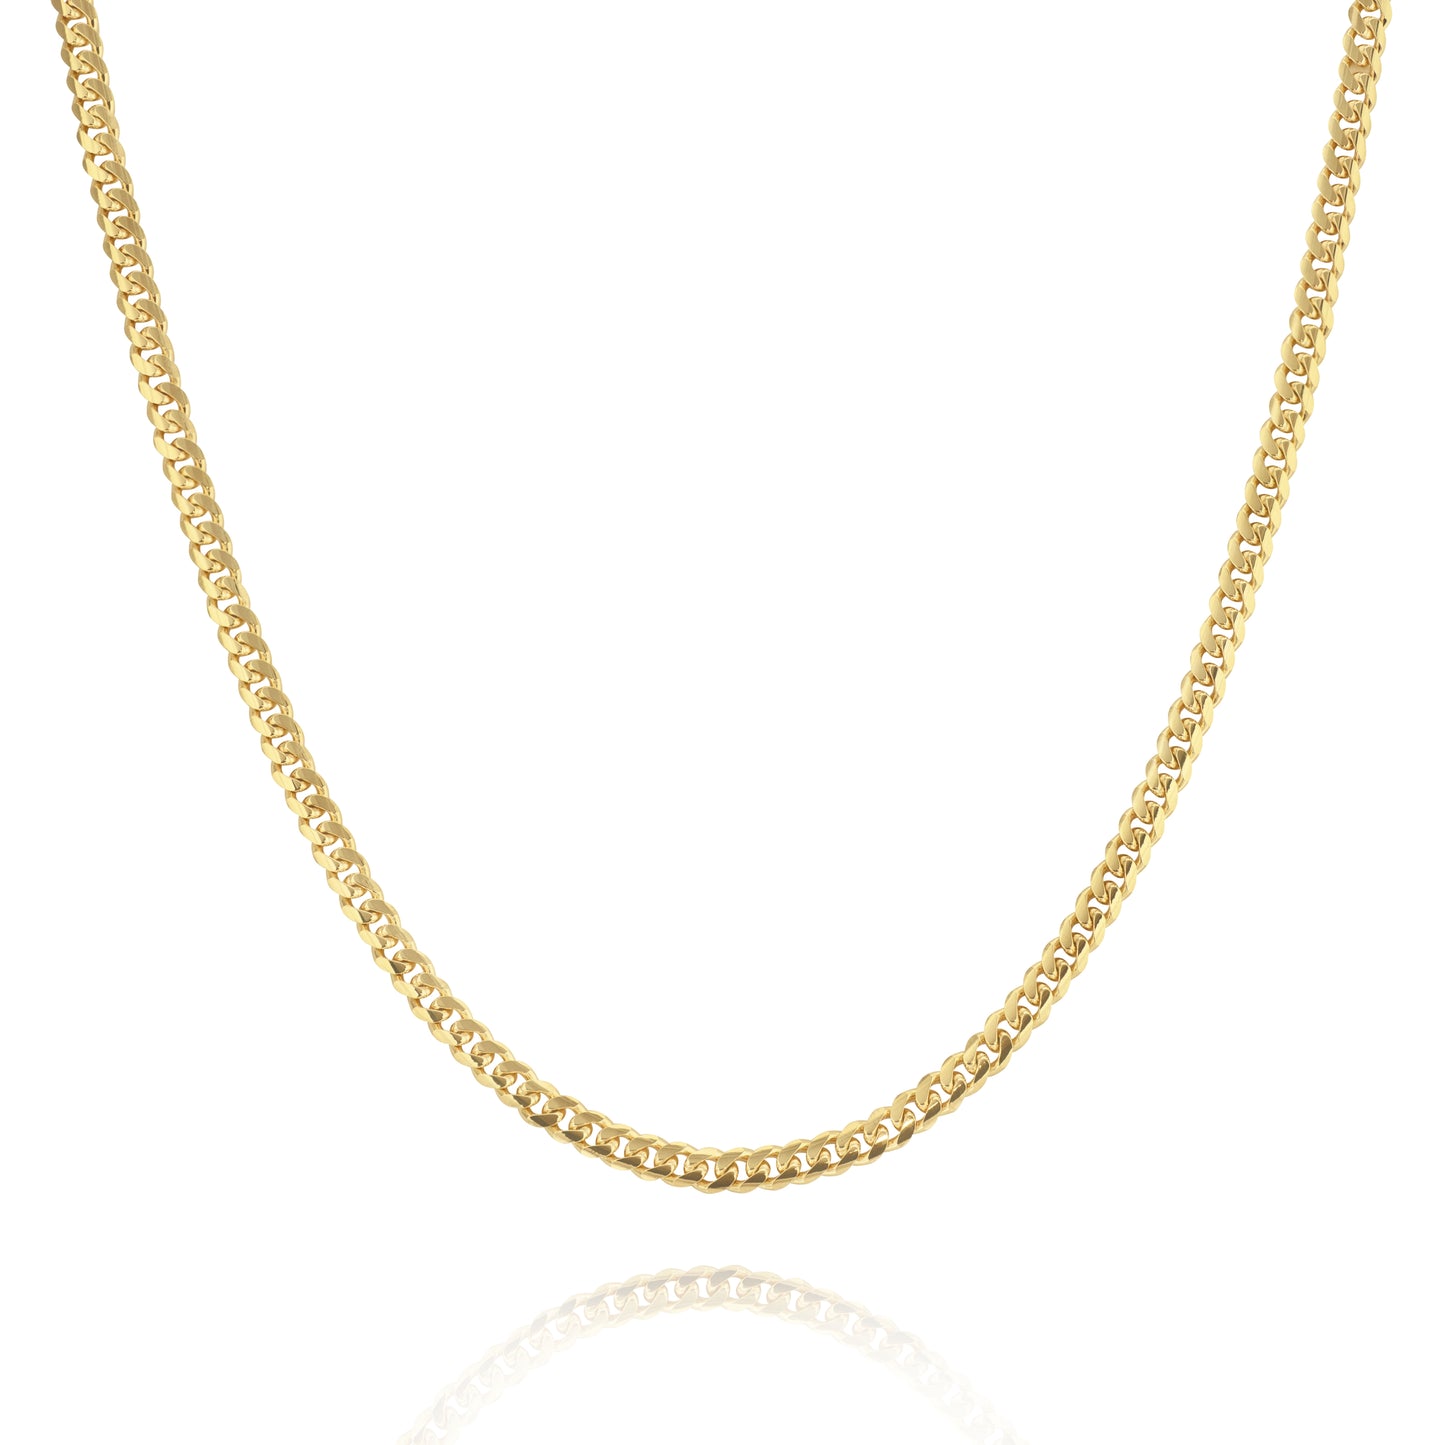 18K Yellow Gold Cuban Link Chain 4Mm 26In 24.1Dwt / 37.5 G